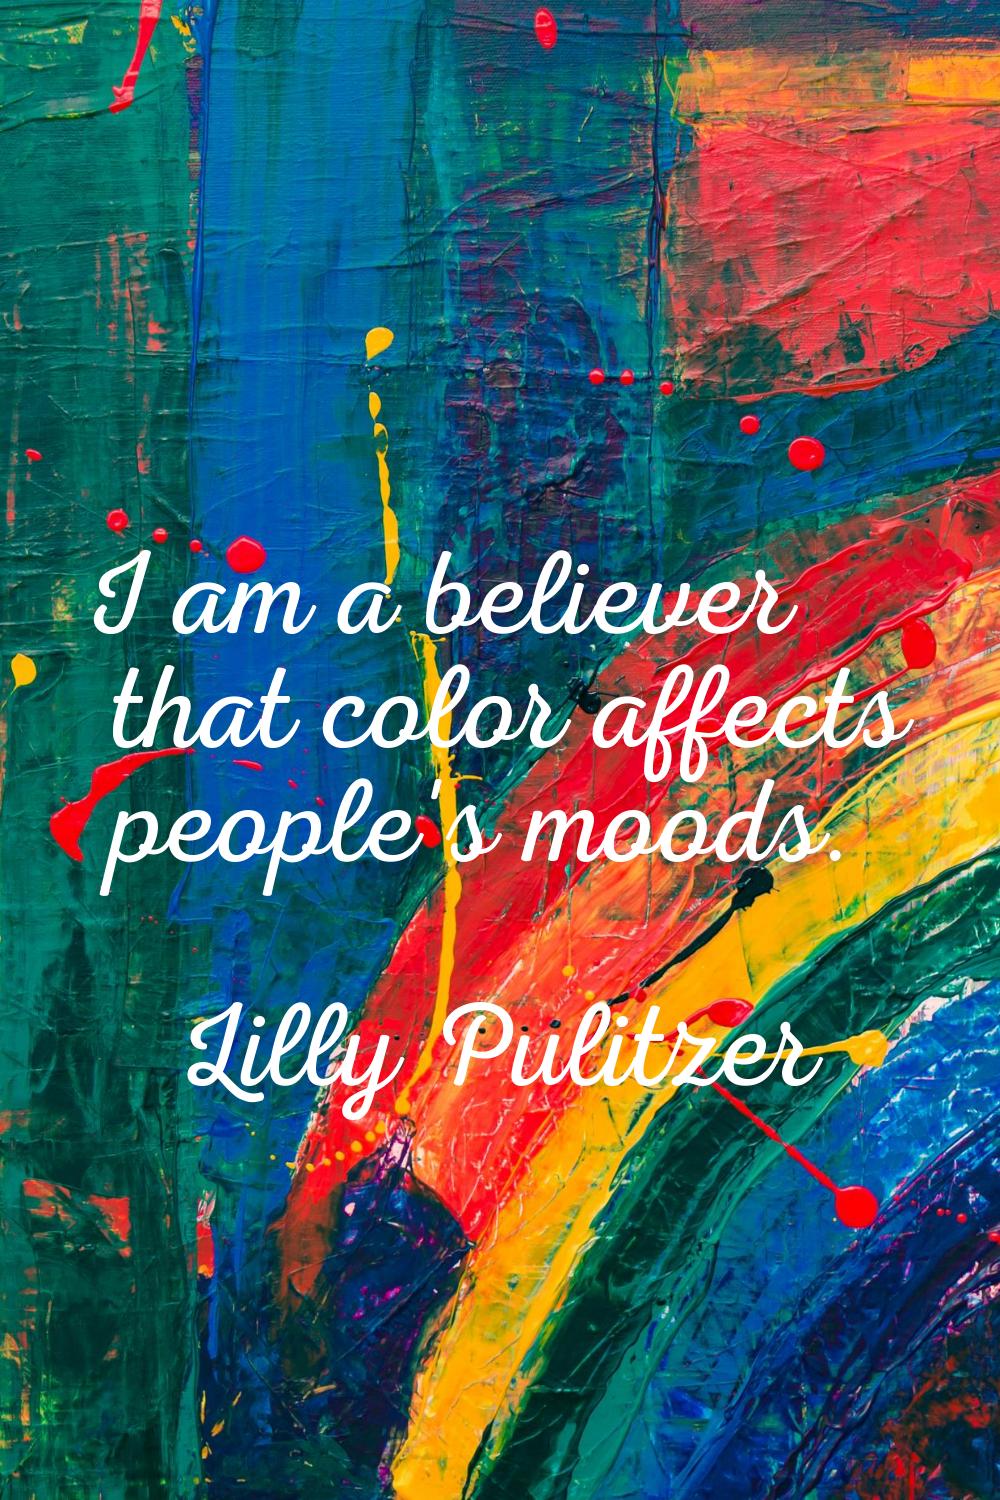 I am a believer that color affects people's moods.